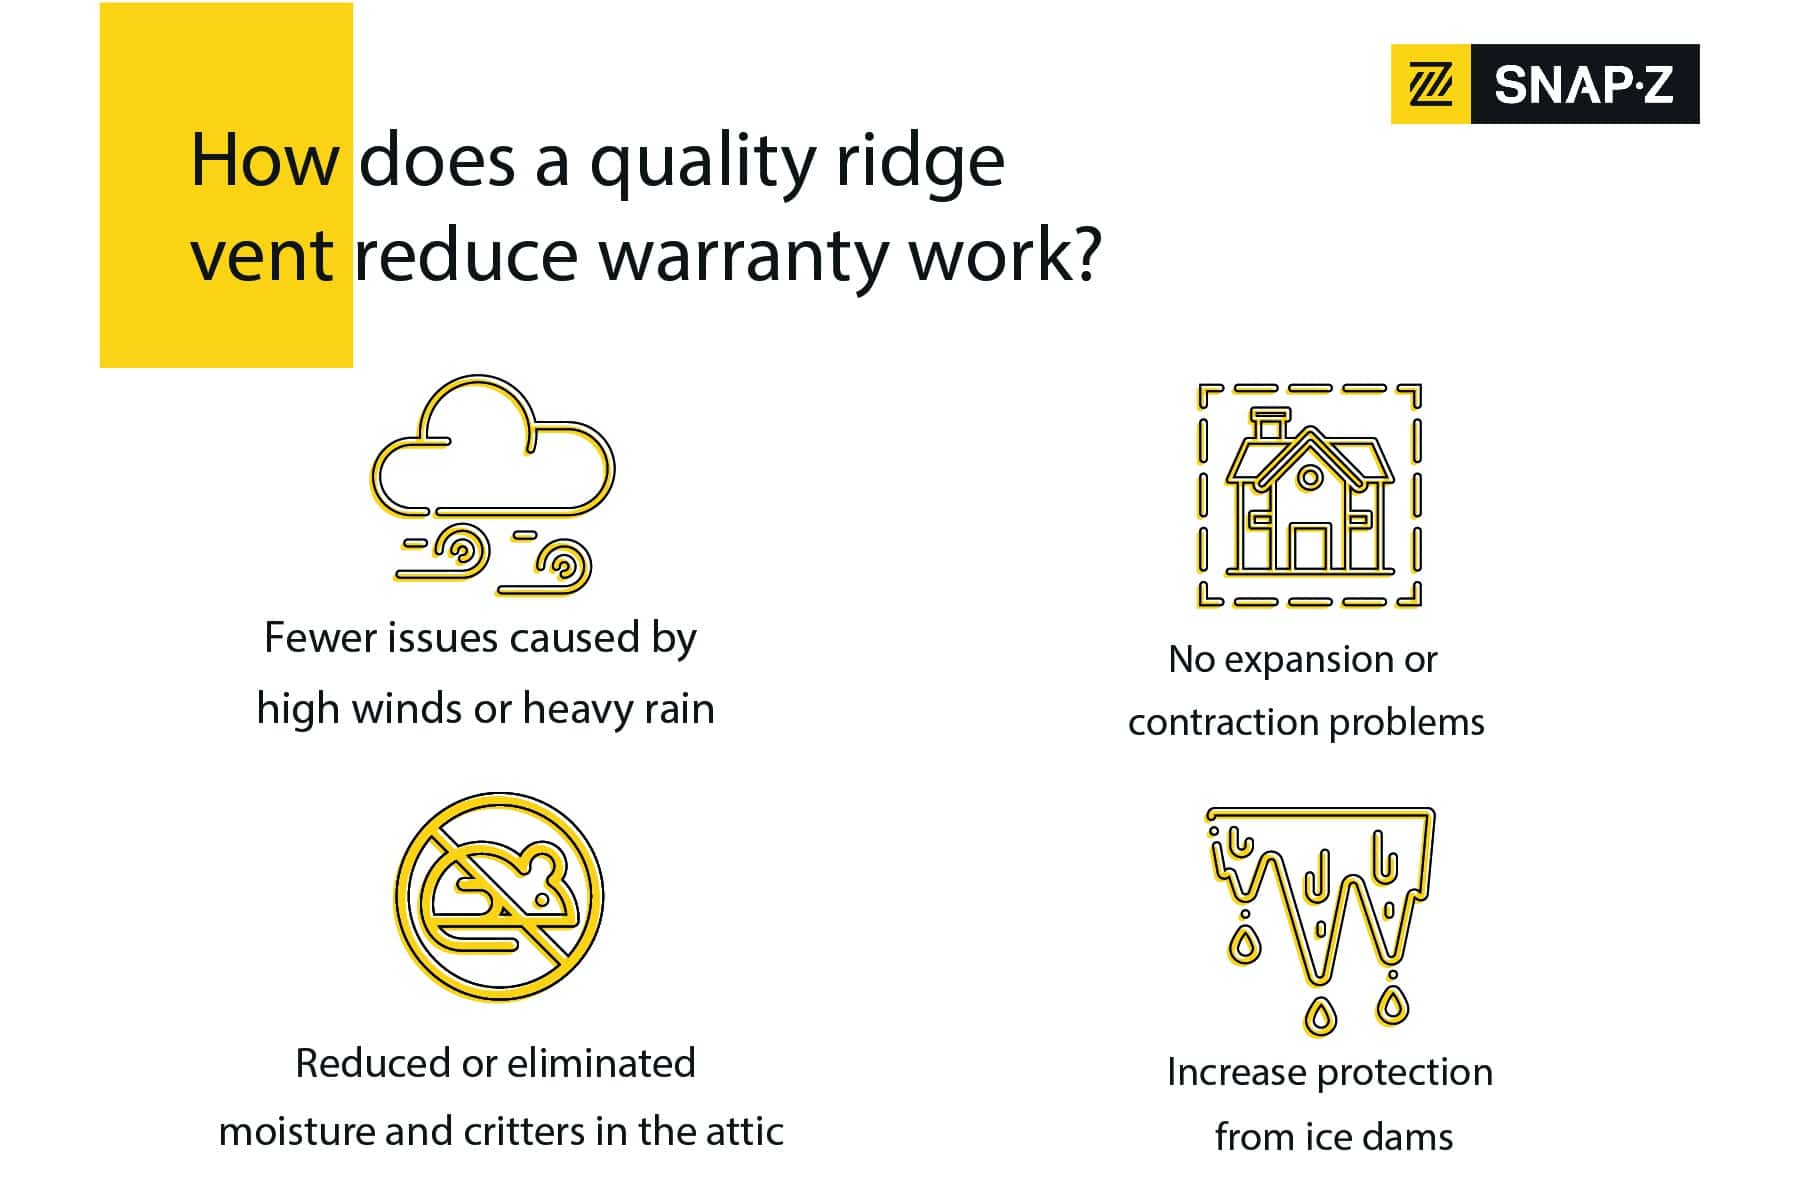 a quality ridge vent reduces roof warranty work